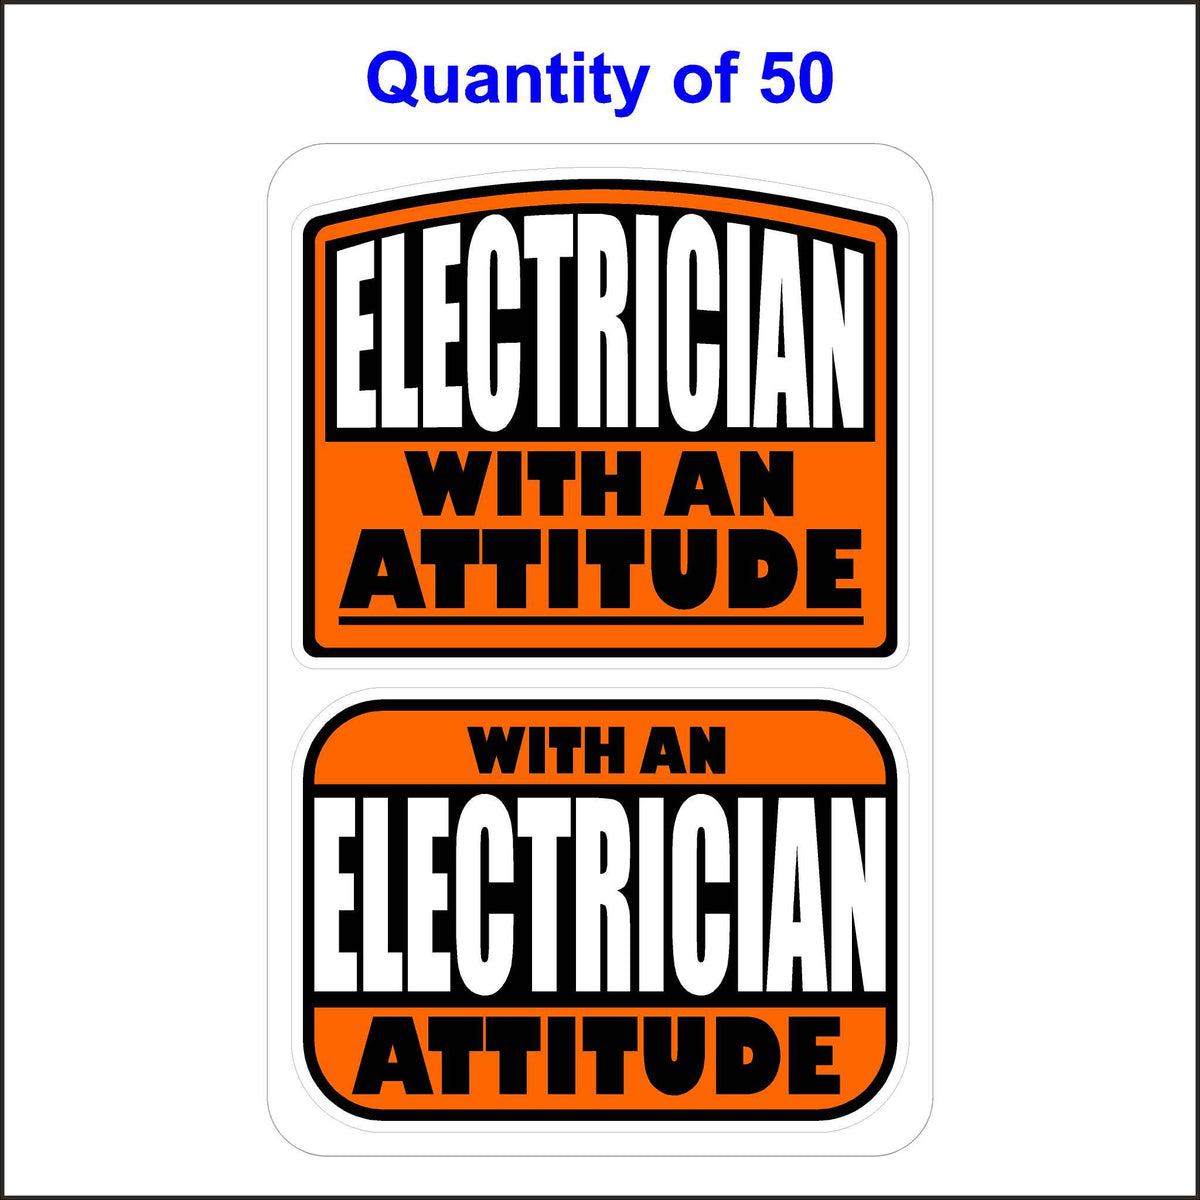 Electrician With An Attitude Stickers 50 Quantity.